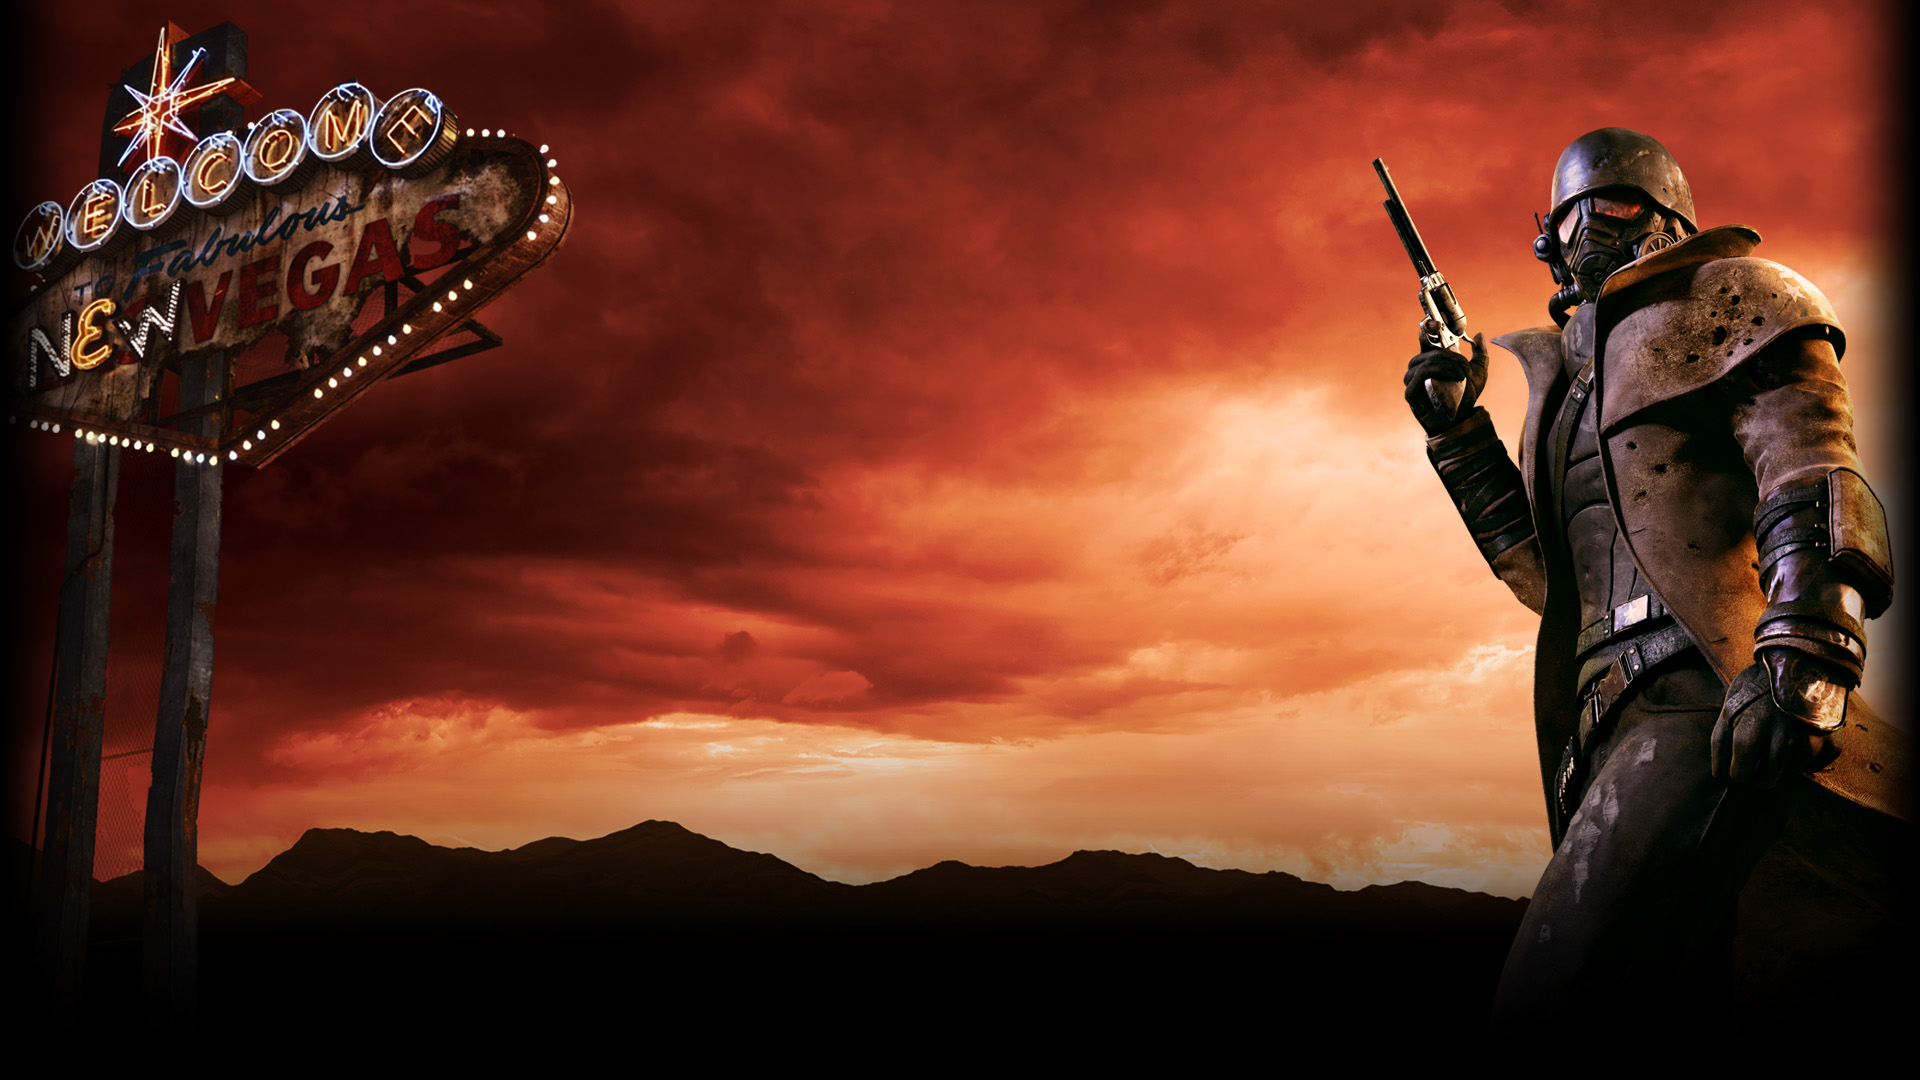 Fallout New Vegas Soundtrack on Steam